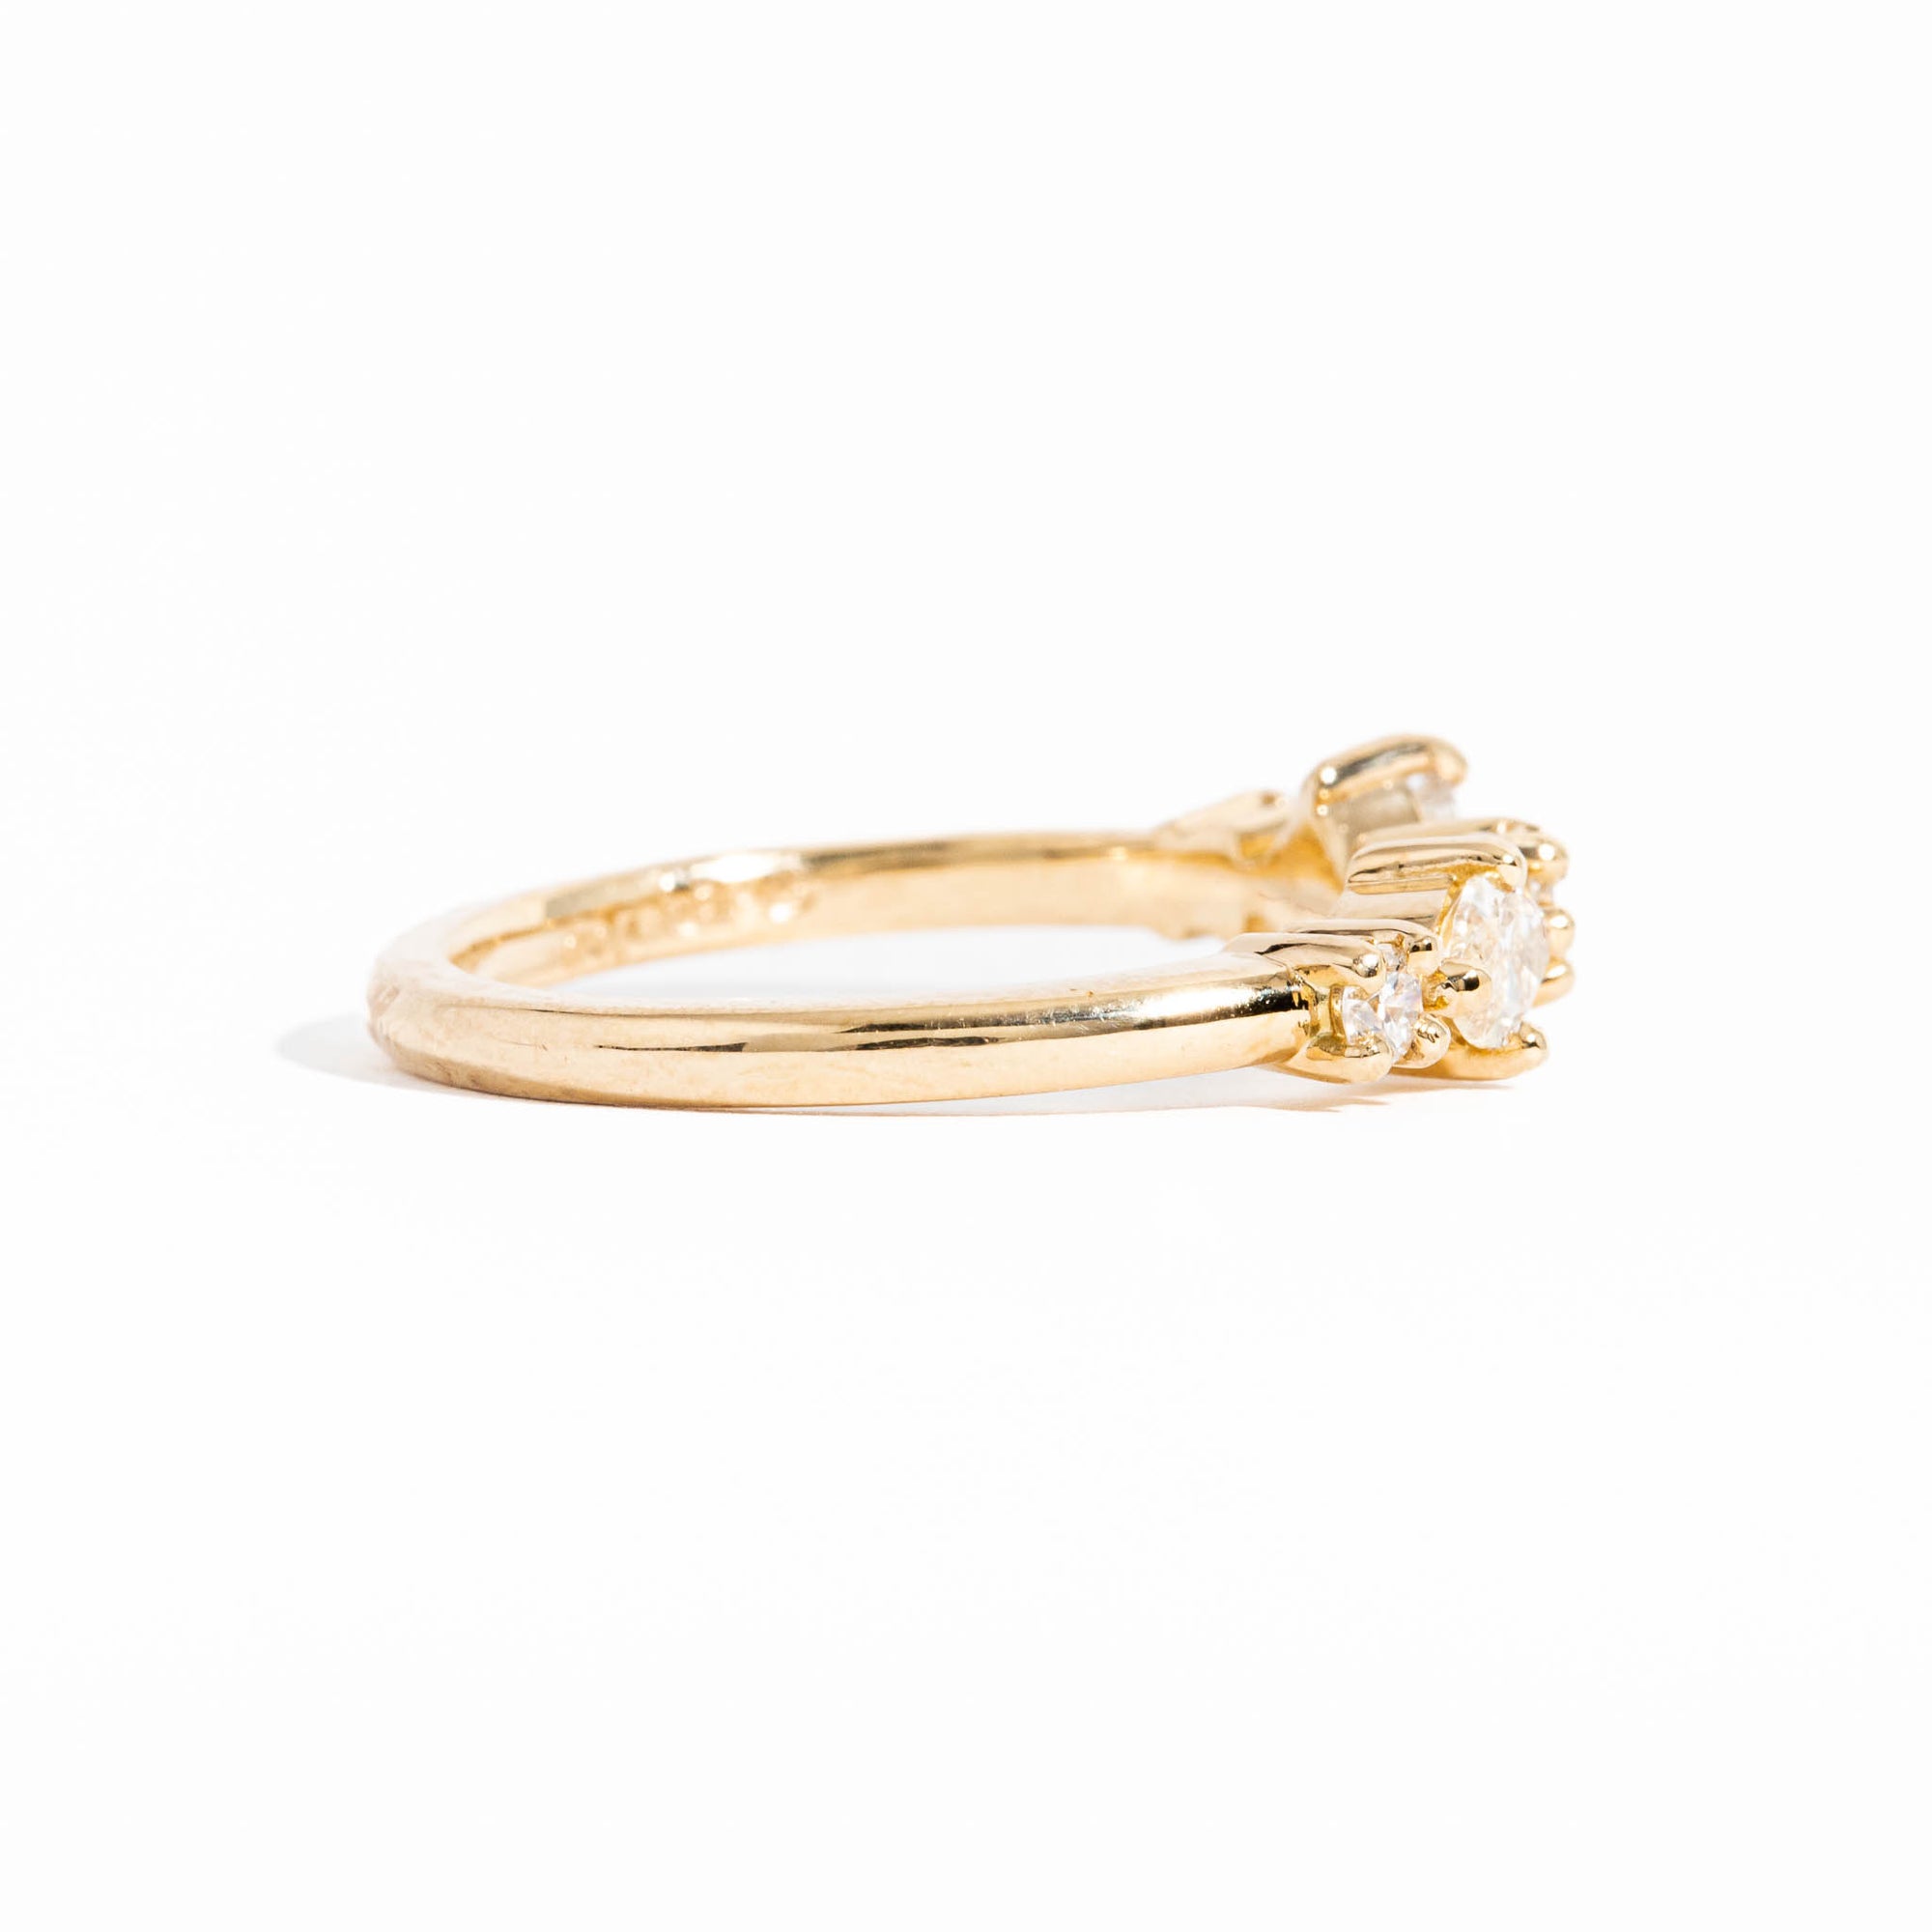 Five Stone White Diamond Engagement Ring in 18 Carat Yellow Gold